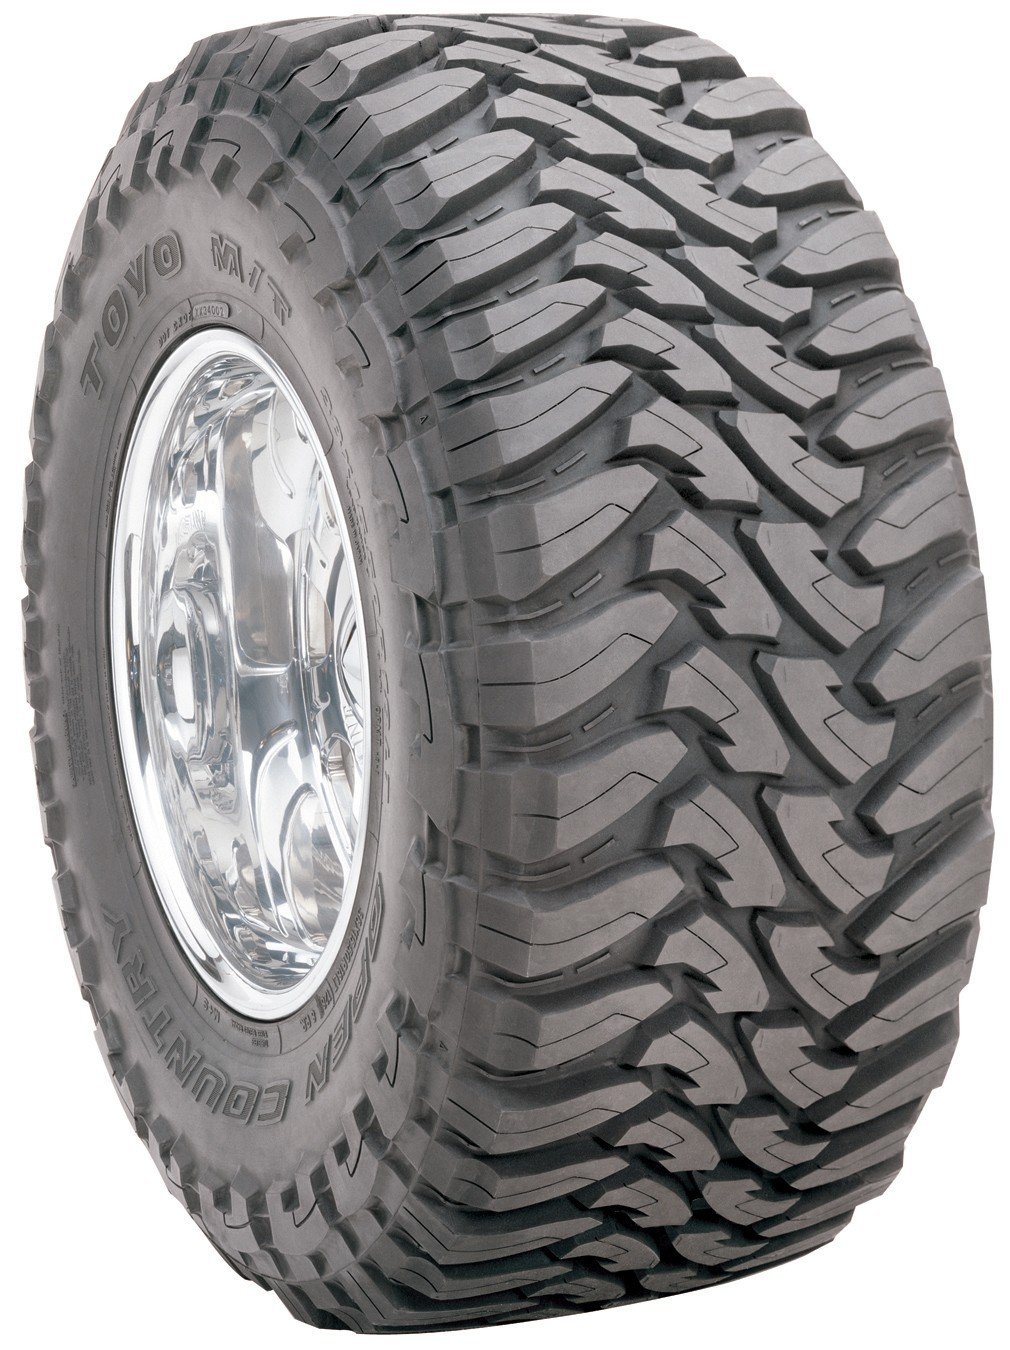 Toyo Open Country M T 37x13 50r24 Ride Time